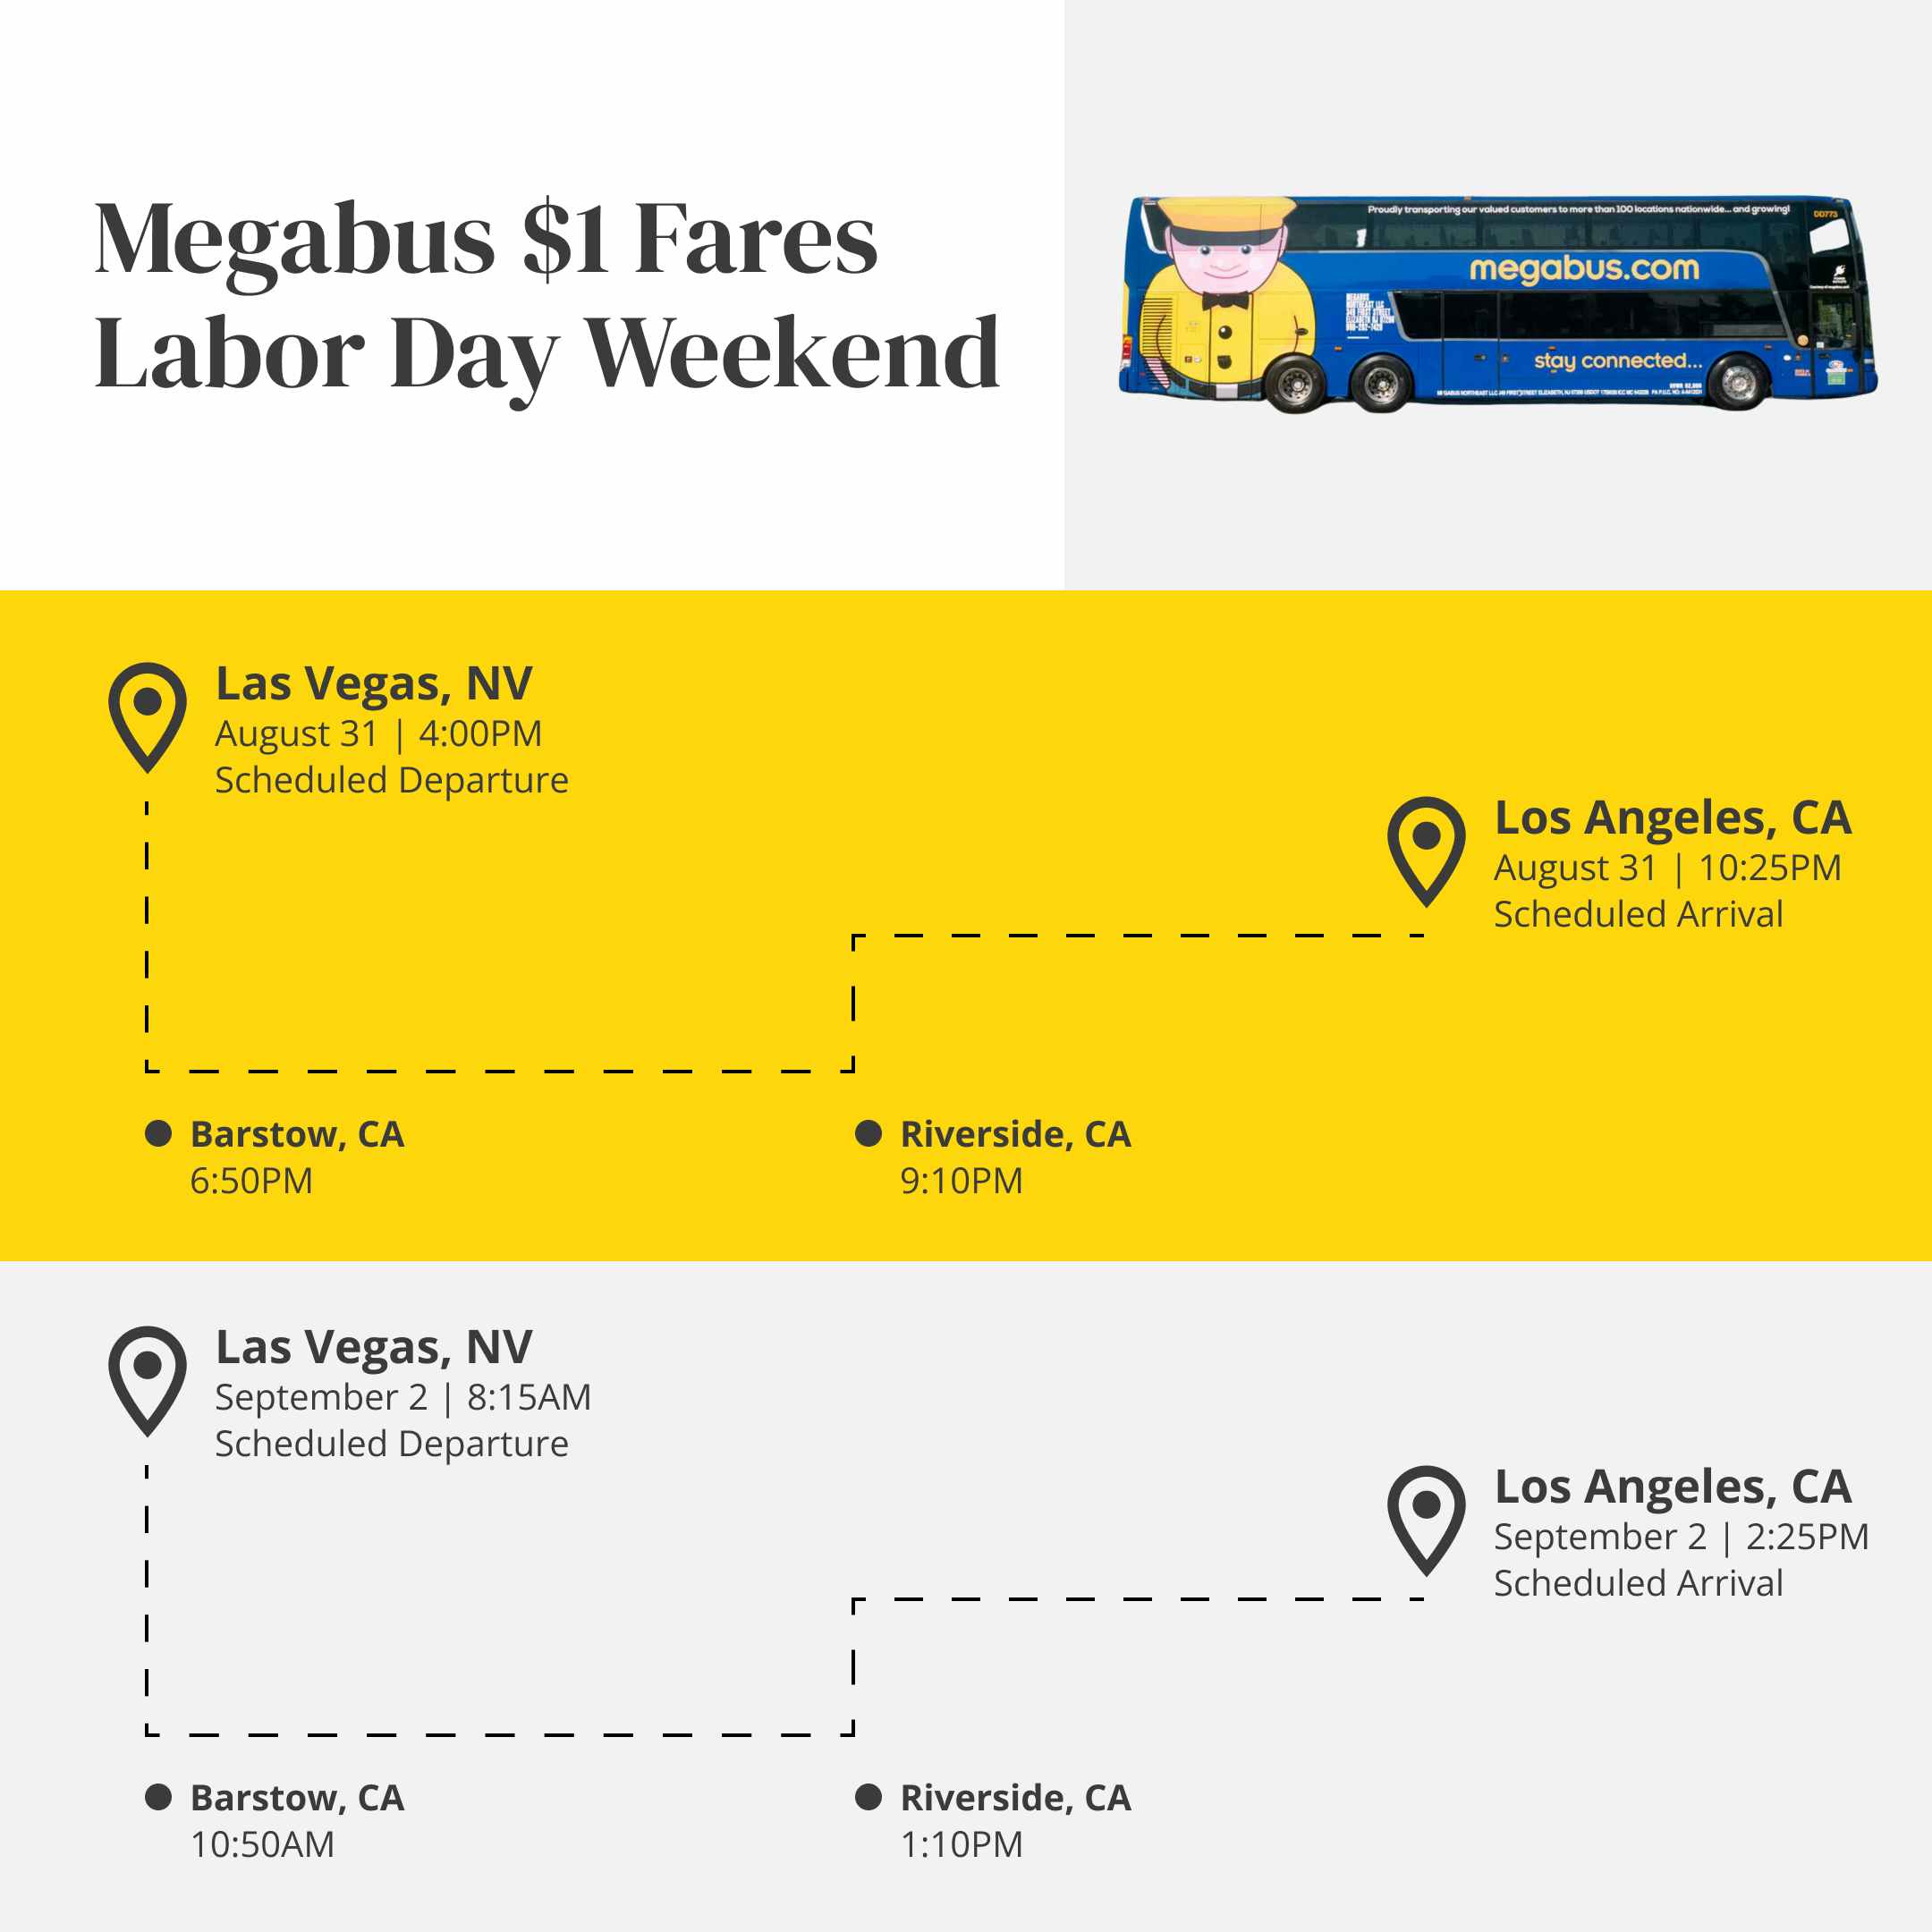 An infographic of some Megabus routes that have $1 fares for Labor Day weekend